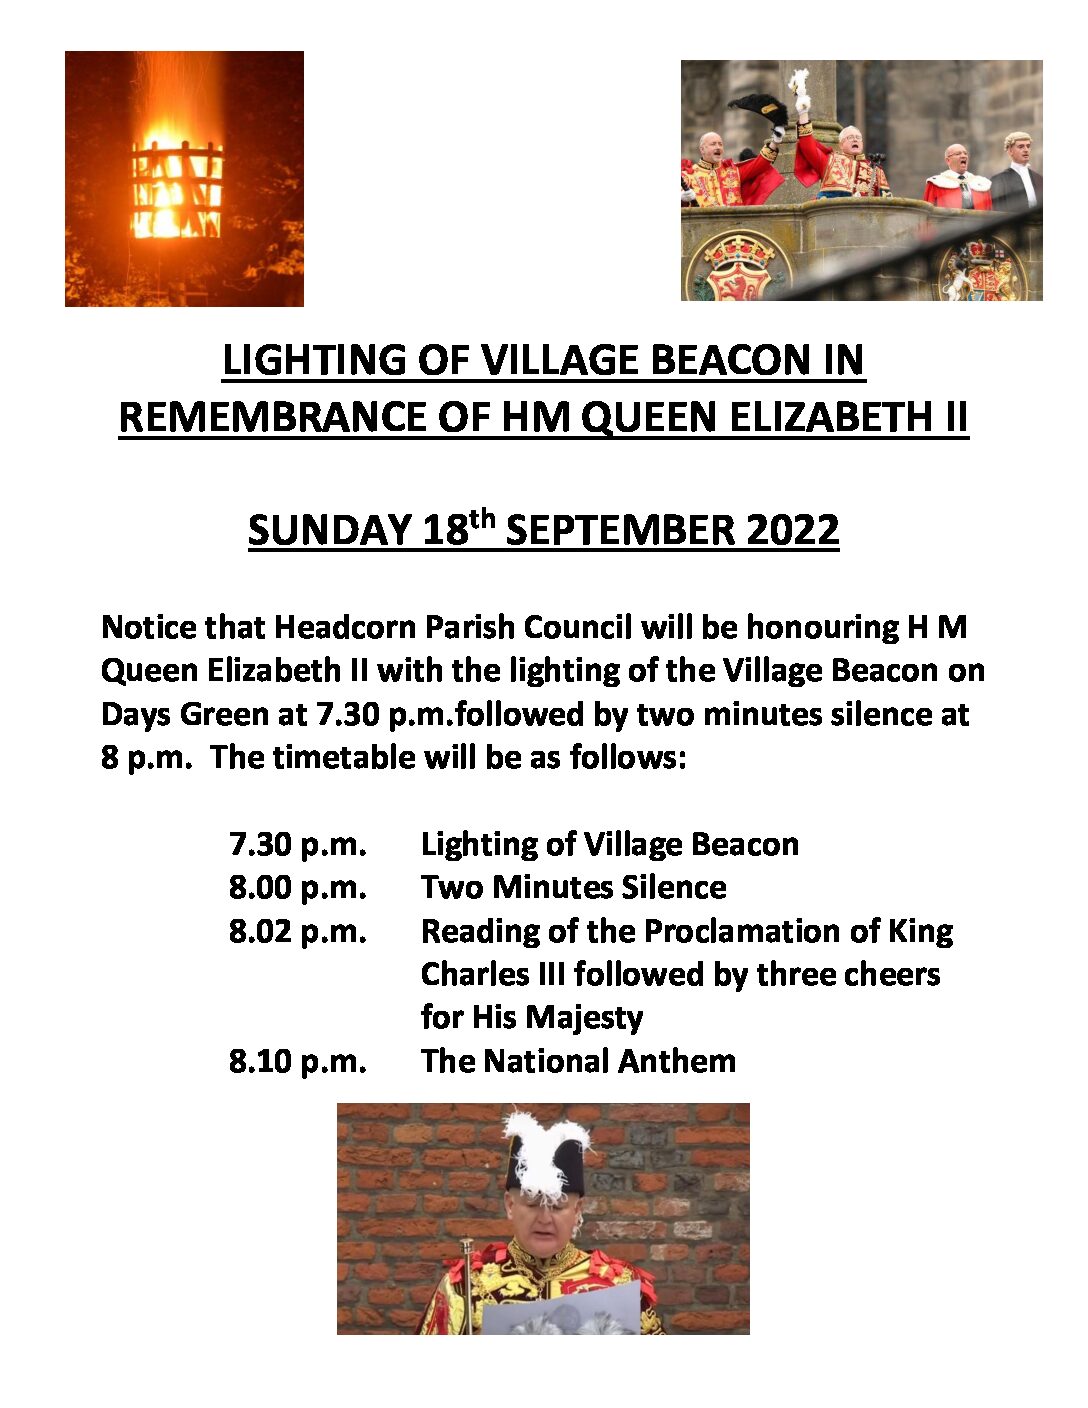 Lighting of the Village beacon in remembrance of HM Queen Elizabeth II